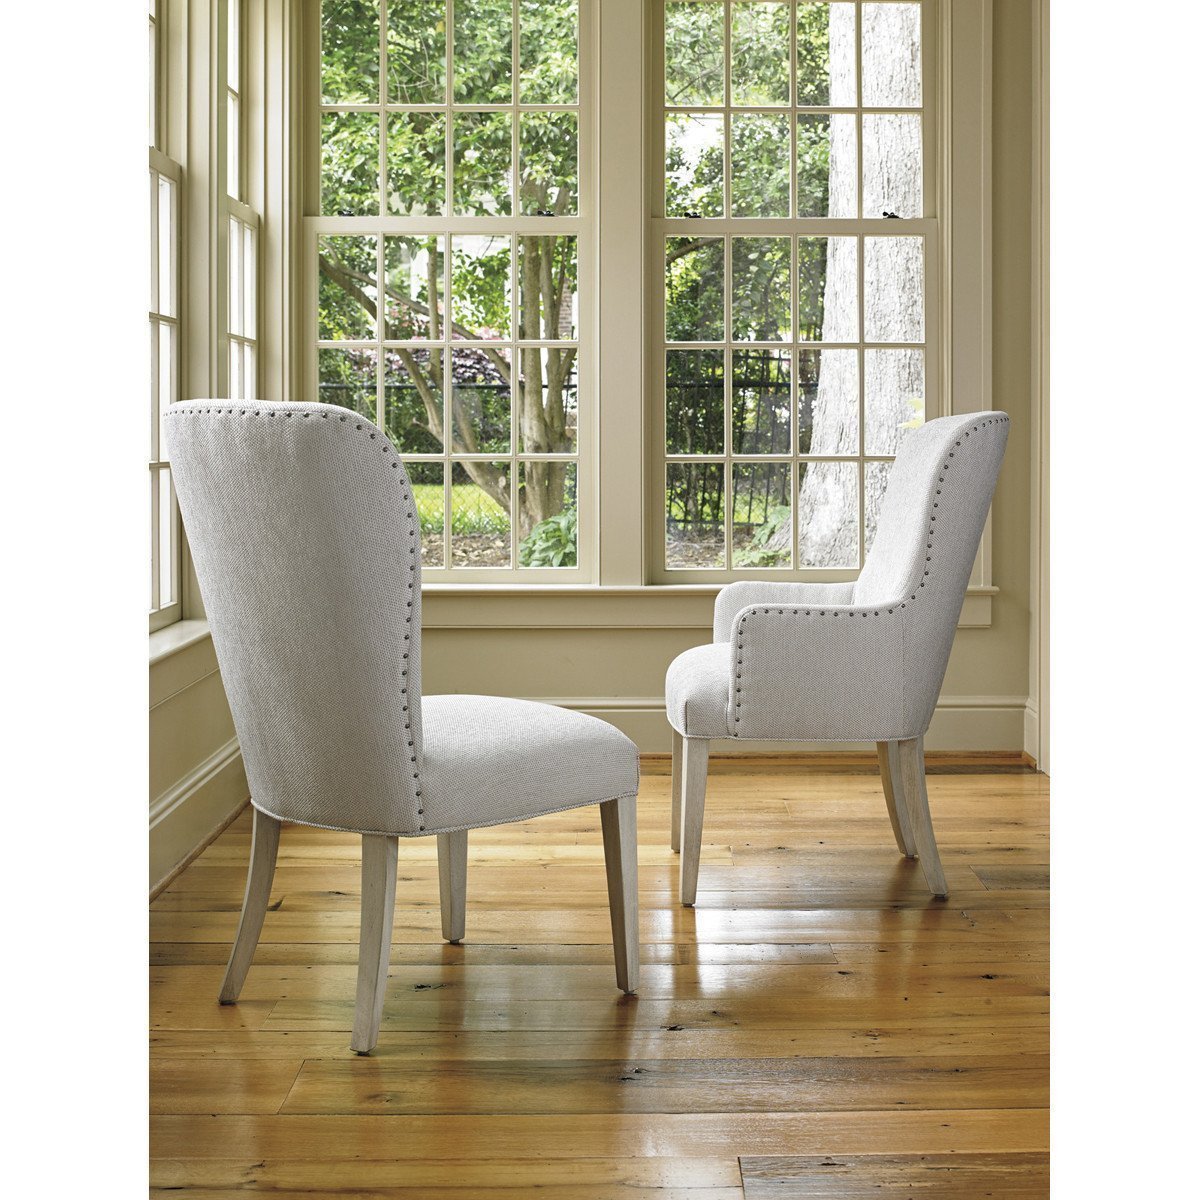 Lexington Oyster Bay Baxter Upholstered Arm Chair